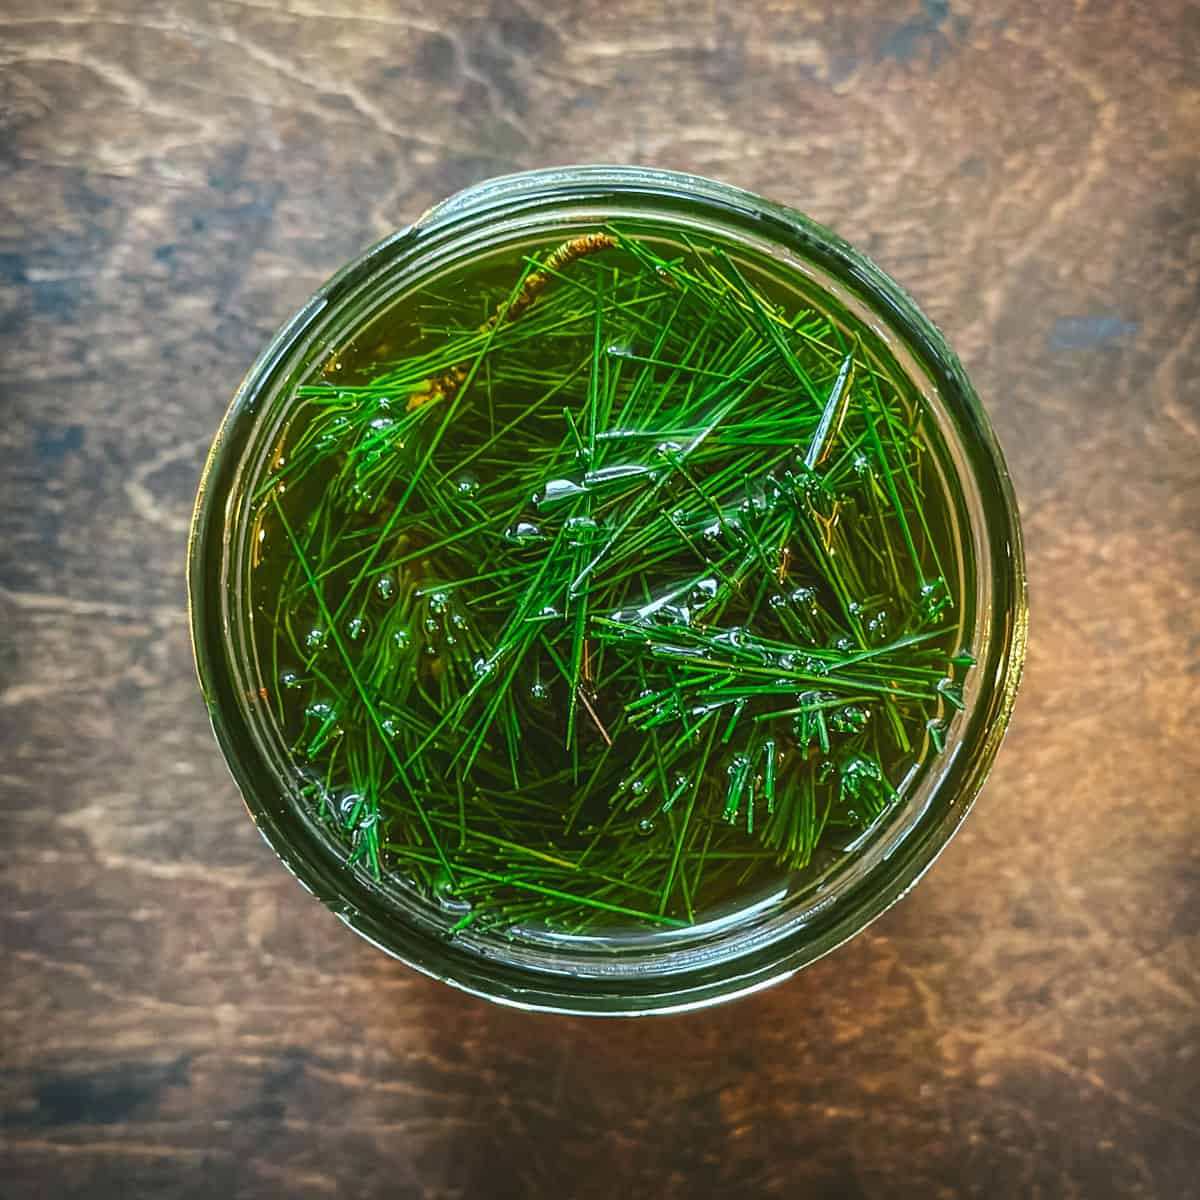 A jar filled with green pine needles infusing in oil, sitting on a dark wood surface. Top view.